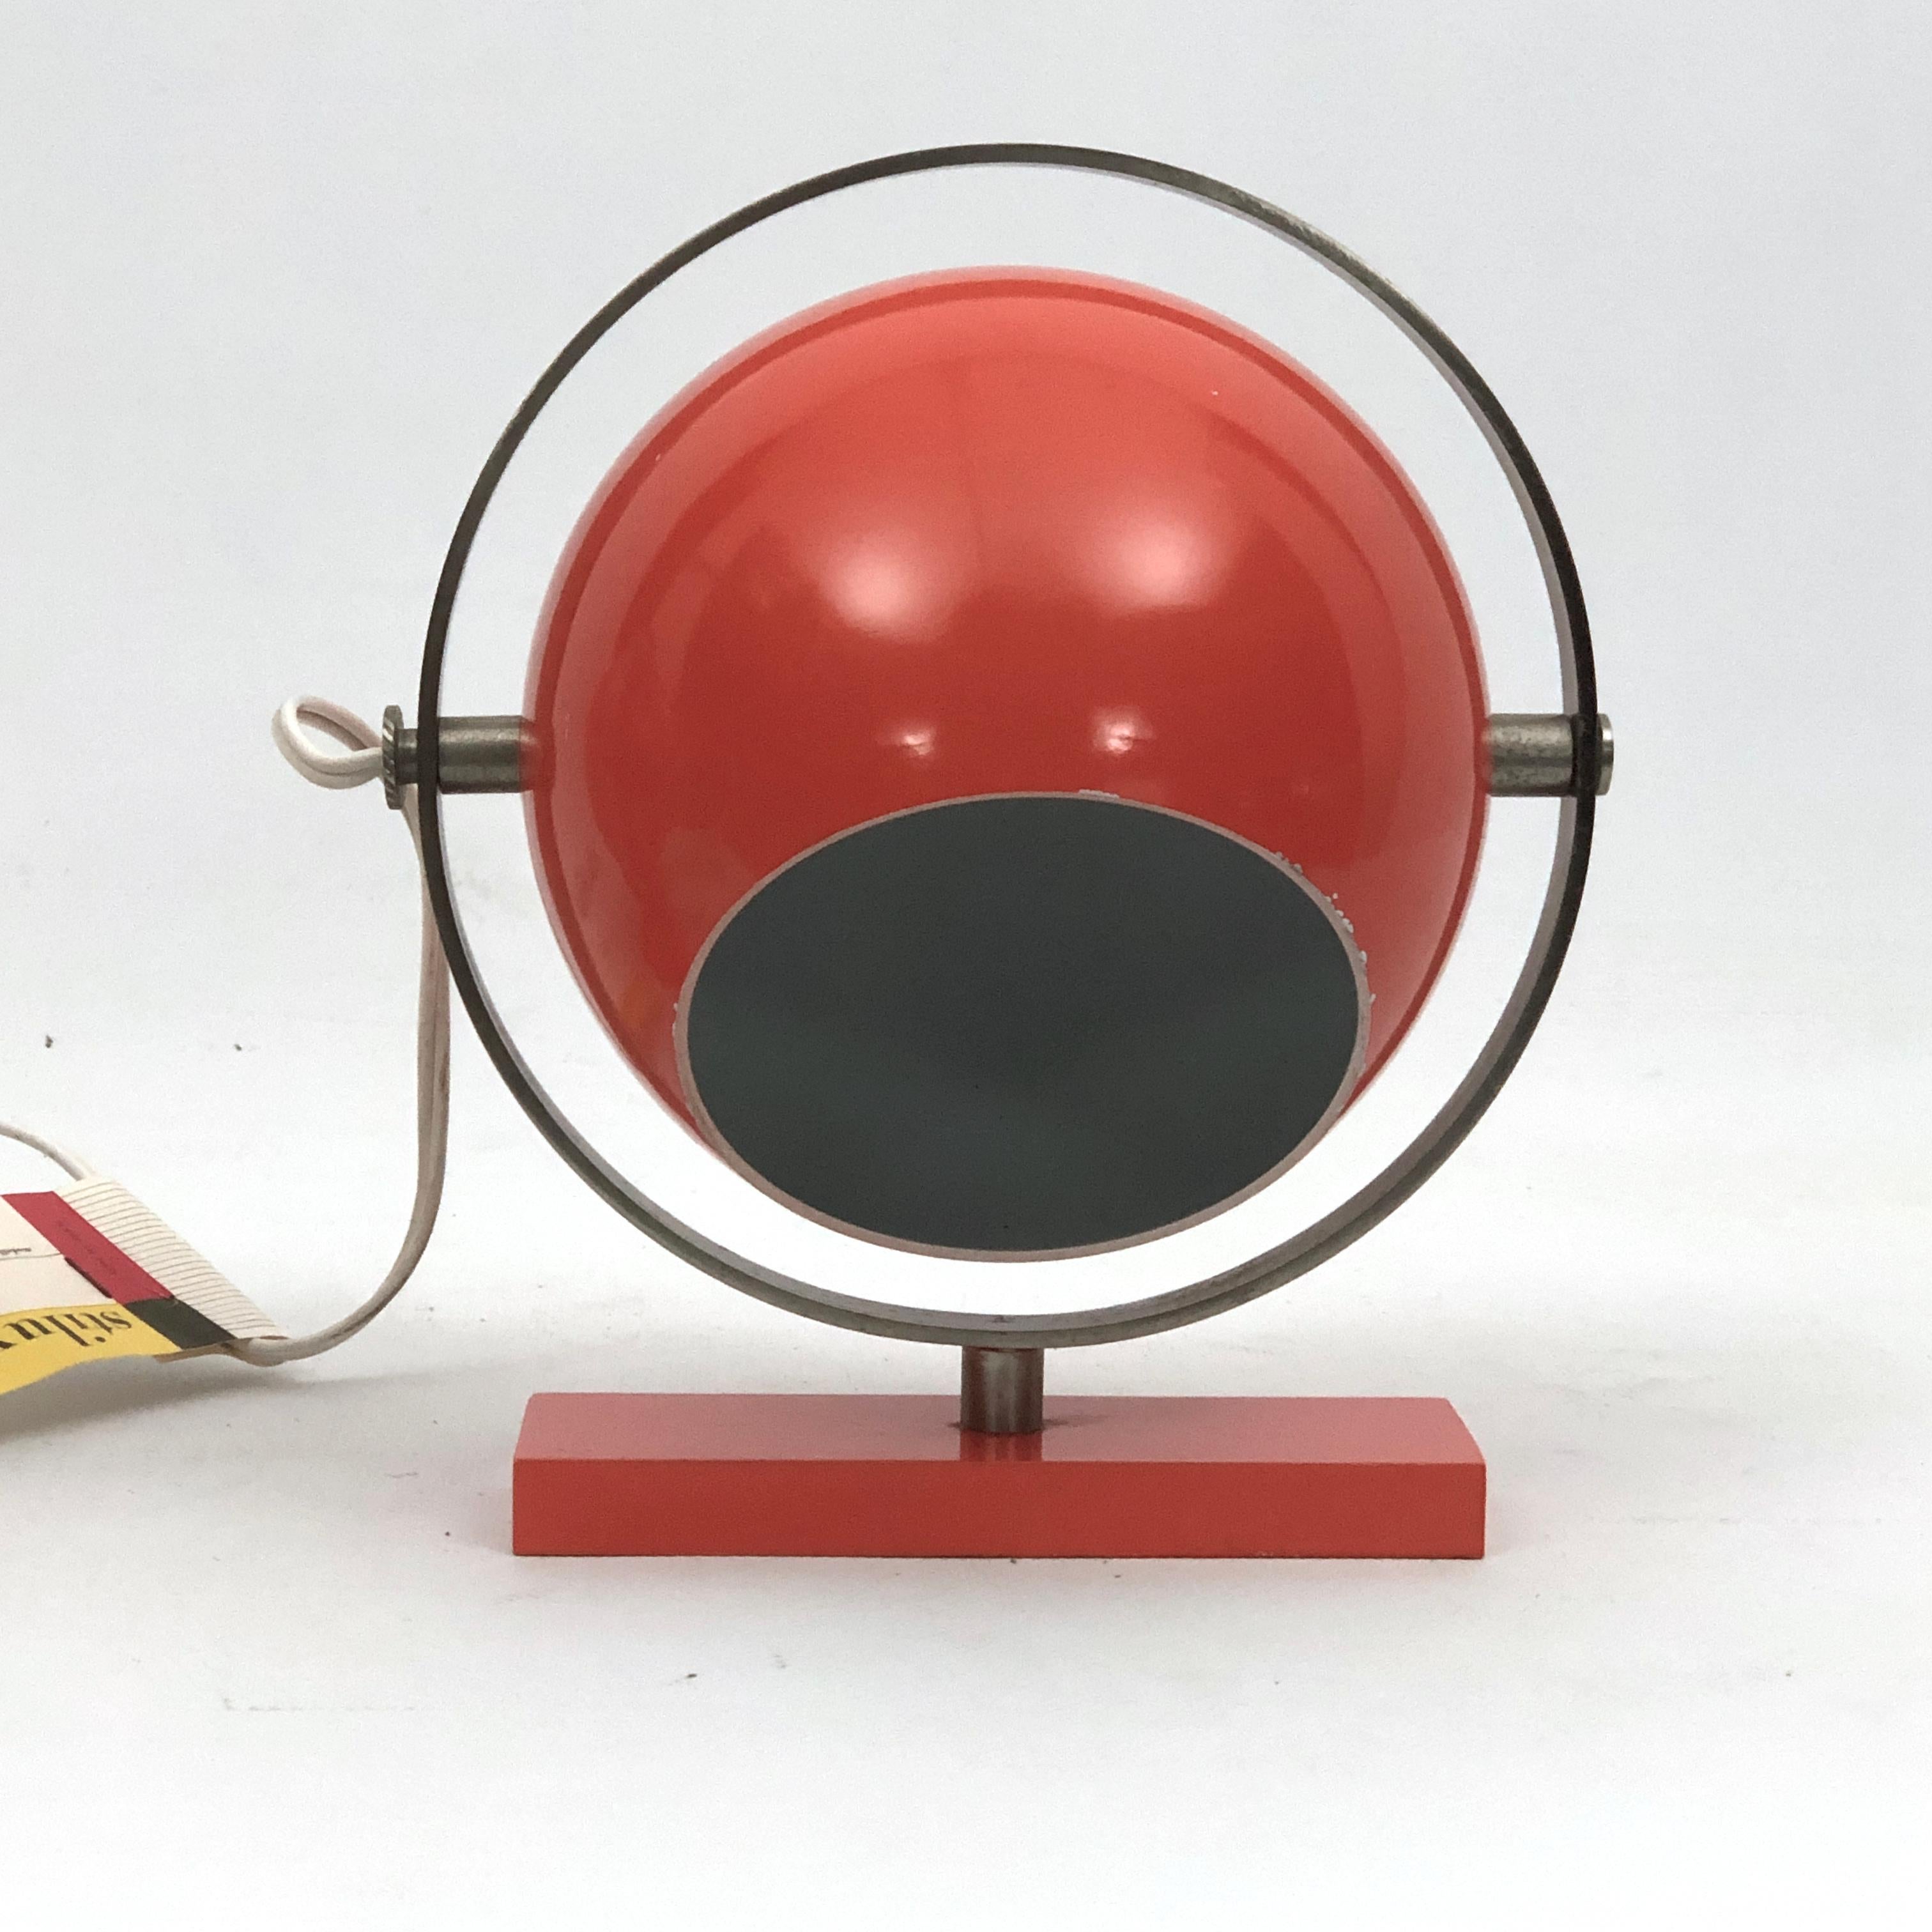 Aluminum Stilux Milano Model Saba, Rare Orange Globe Table Lamps from 60s. Set of Two For Sale